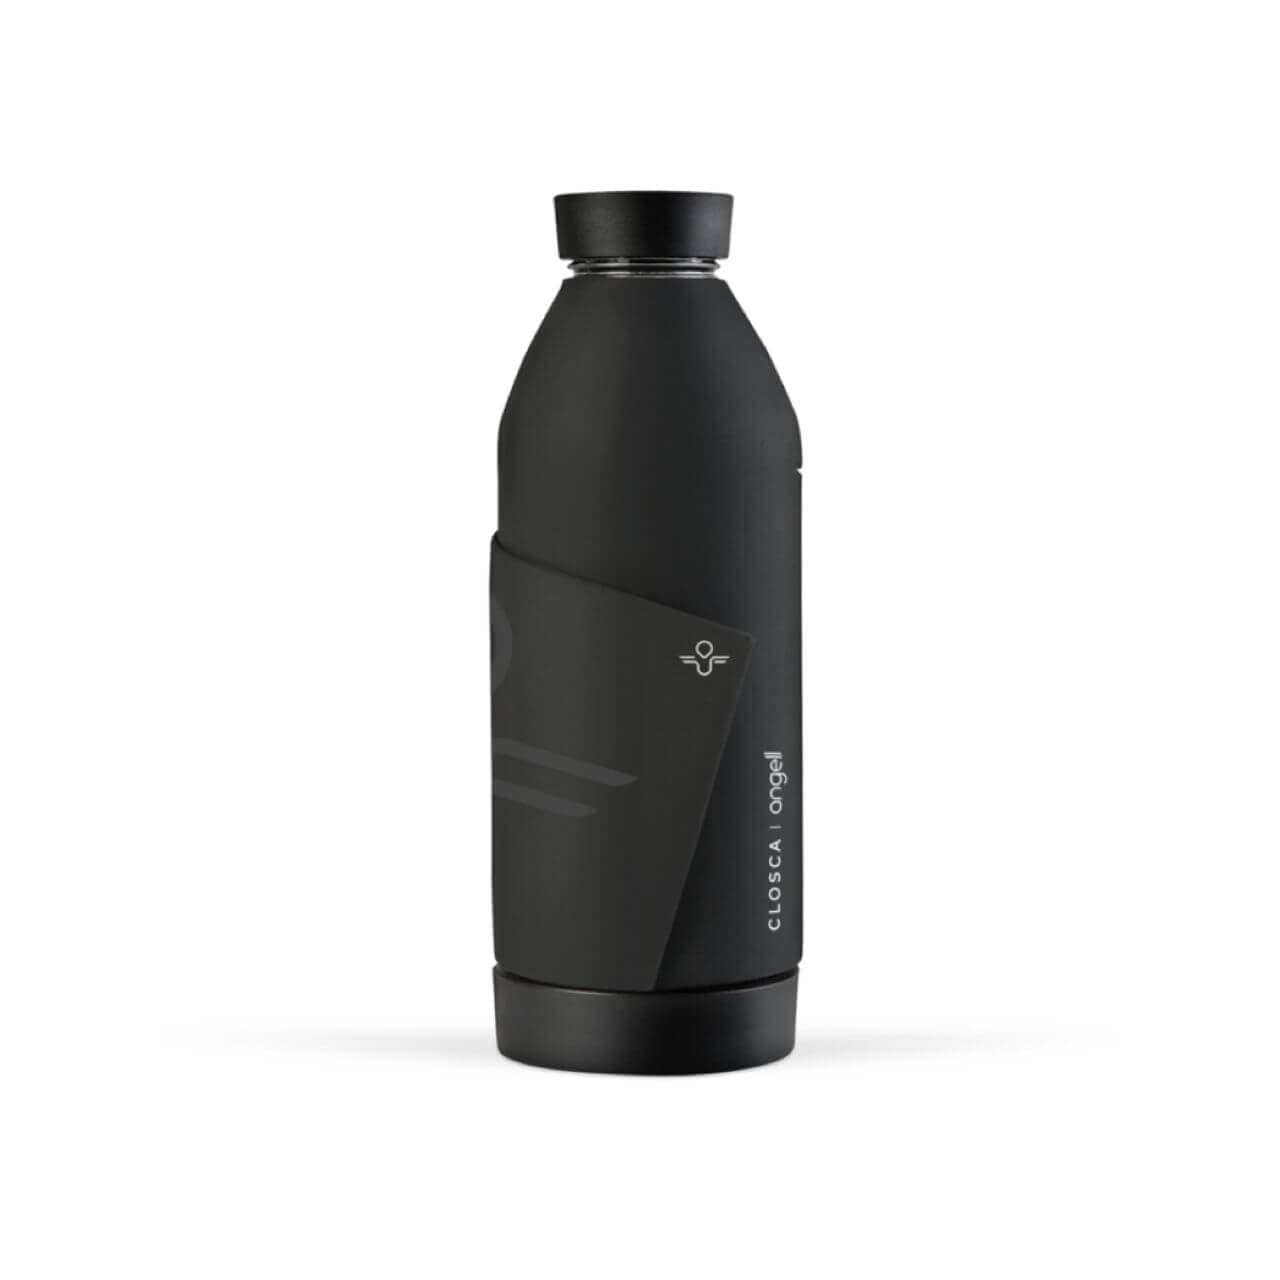 Connected water bottle